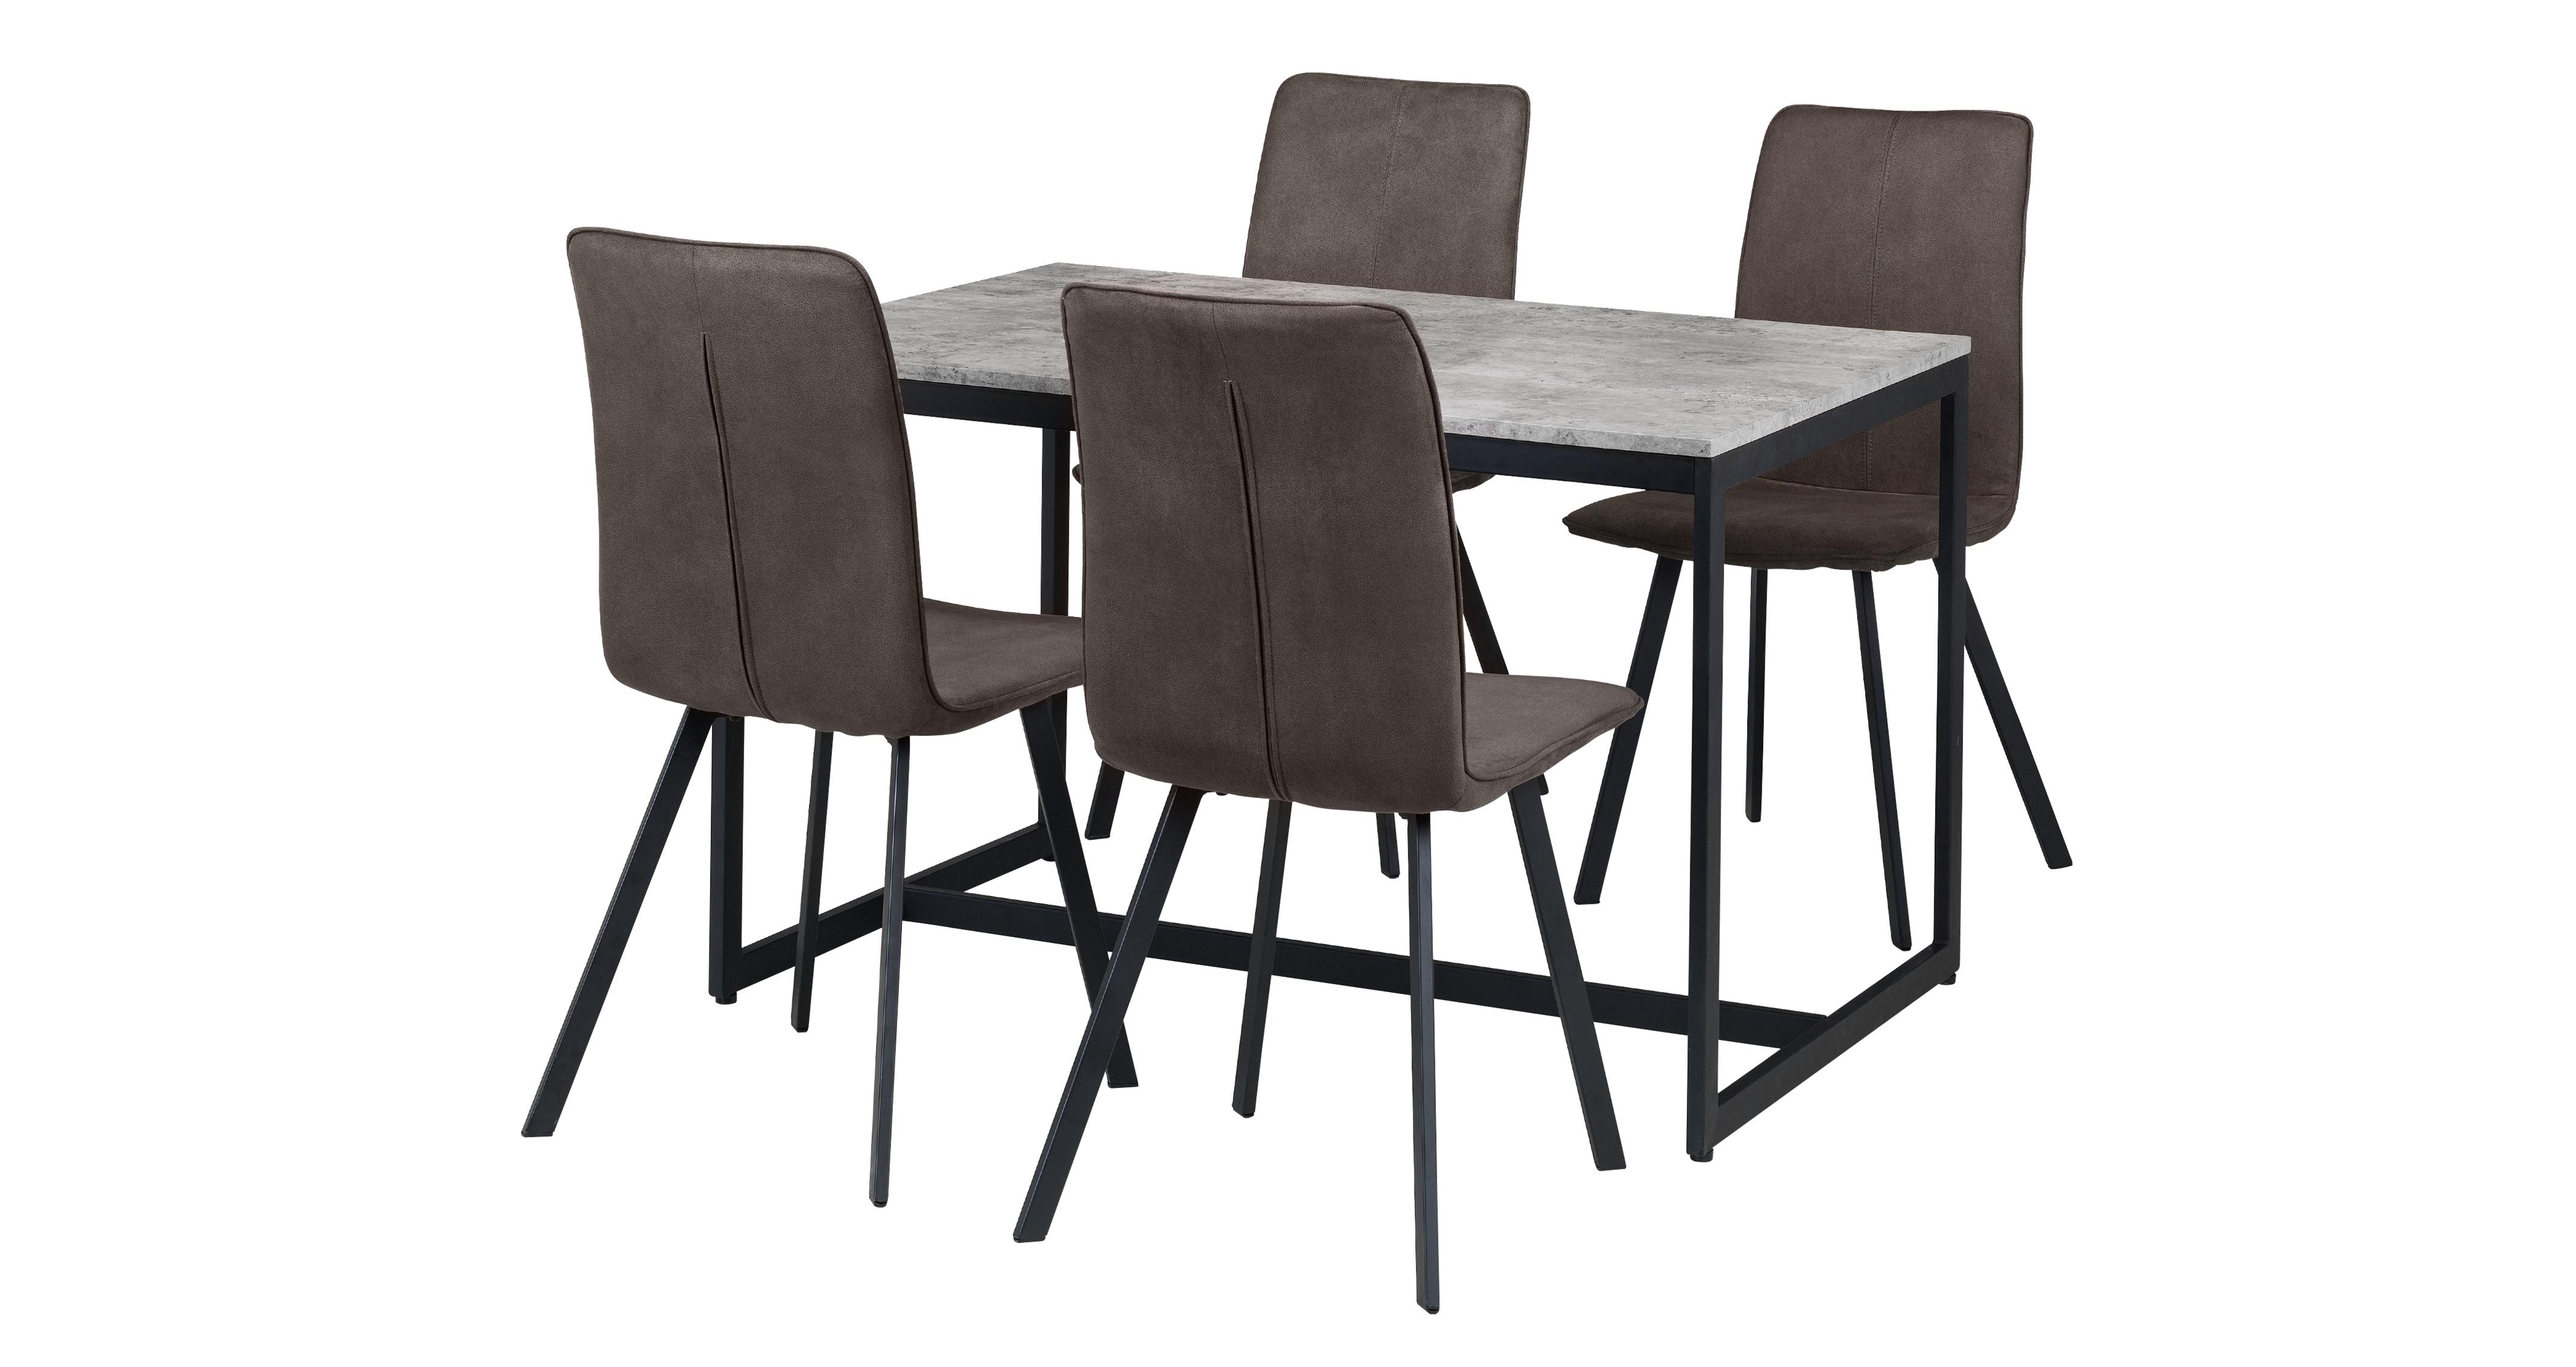 Rondo Fixed Top Table With 4 Fabric Chairs Dfs Ireland